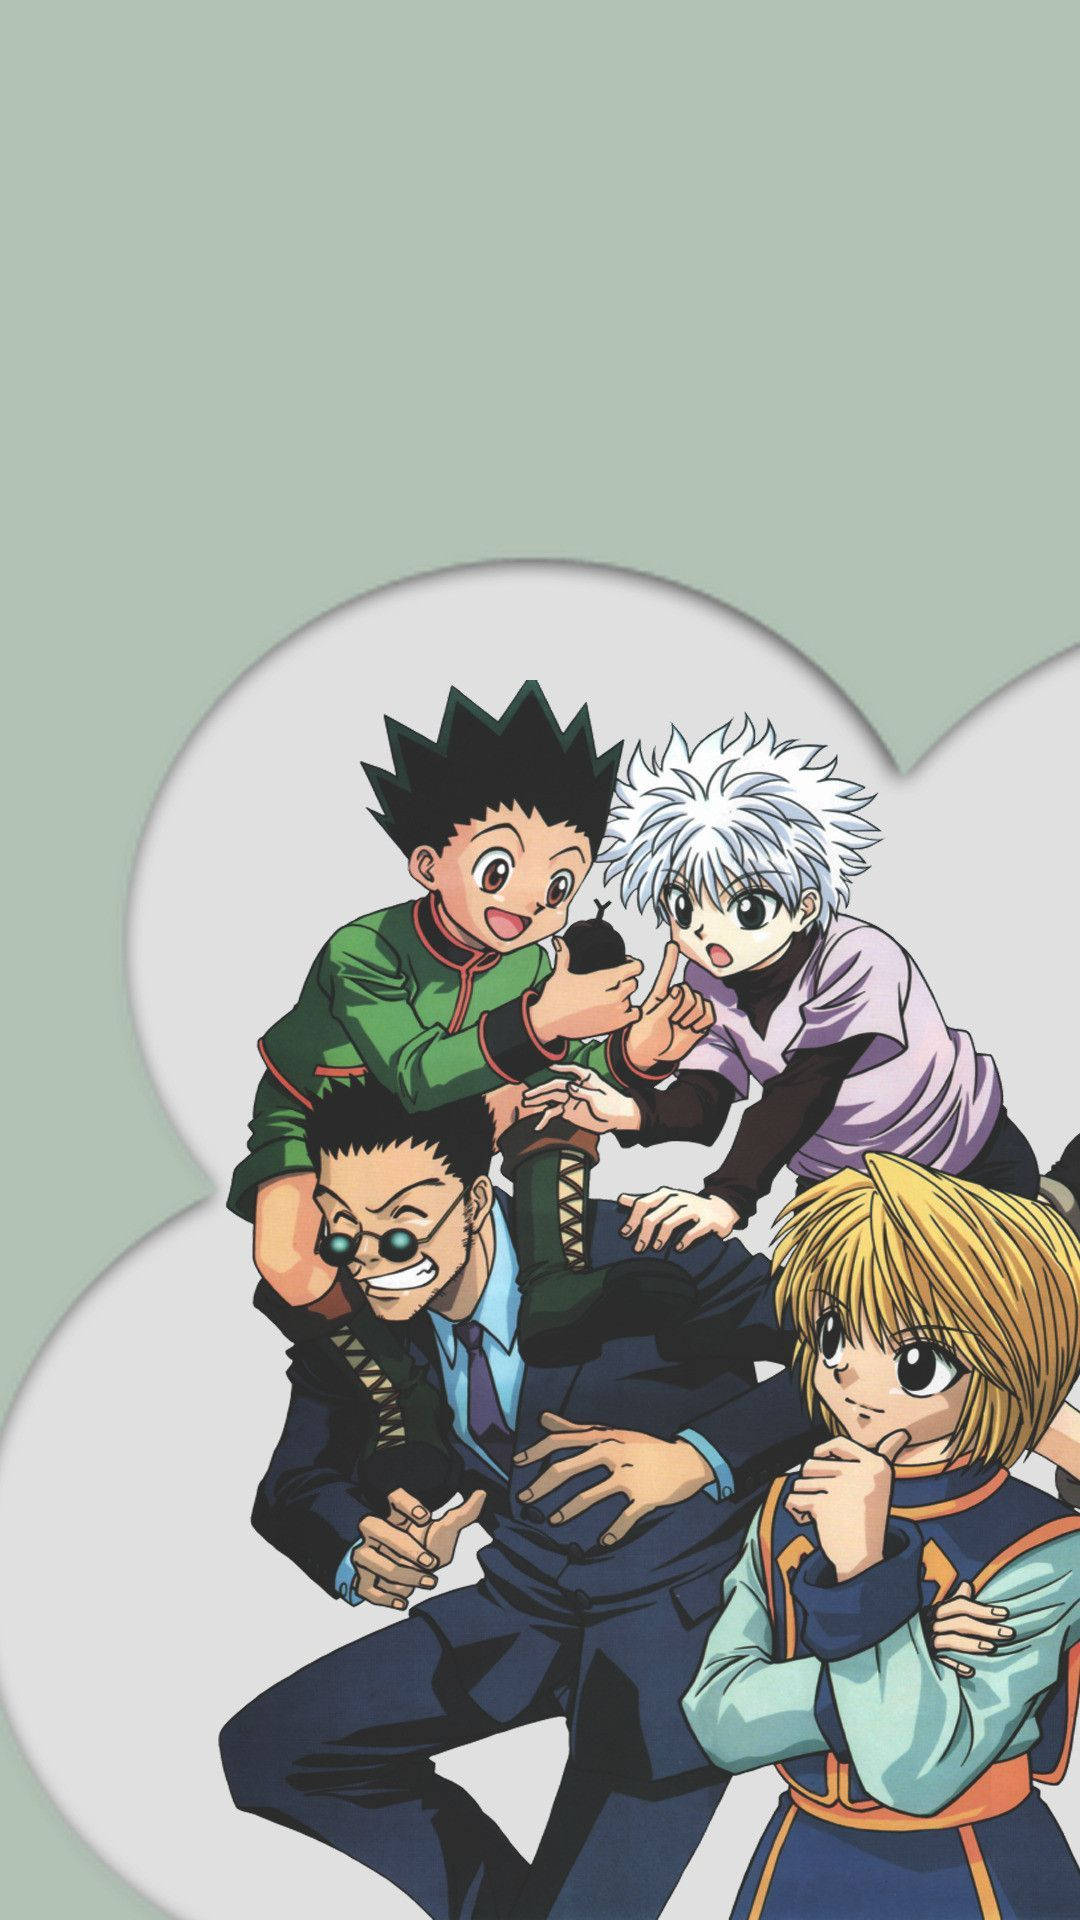 Don’t miss out on the latest action-packed episodes of Hunter X Hunter with your iPhone. Wallpaper